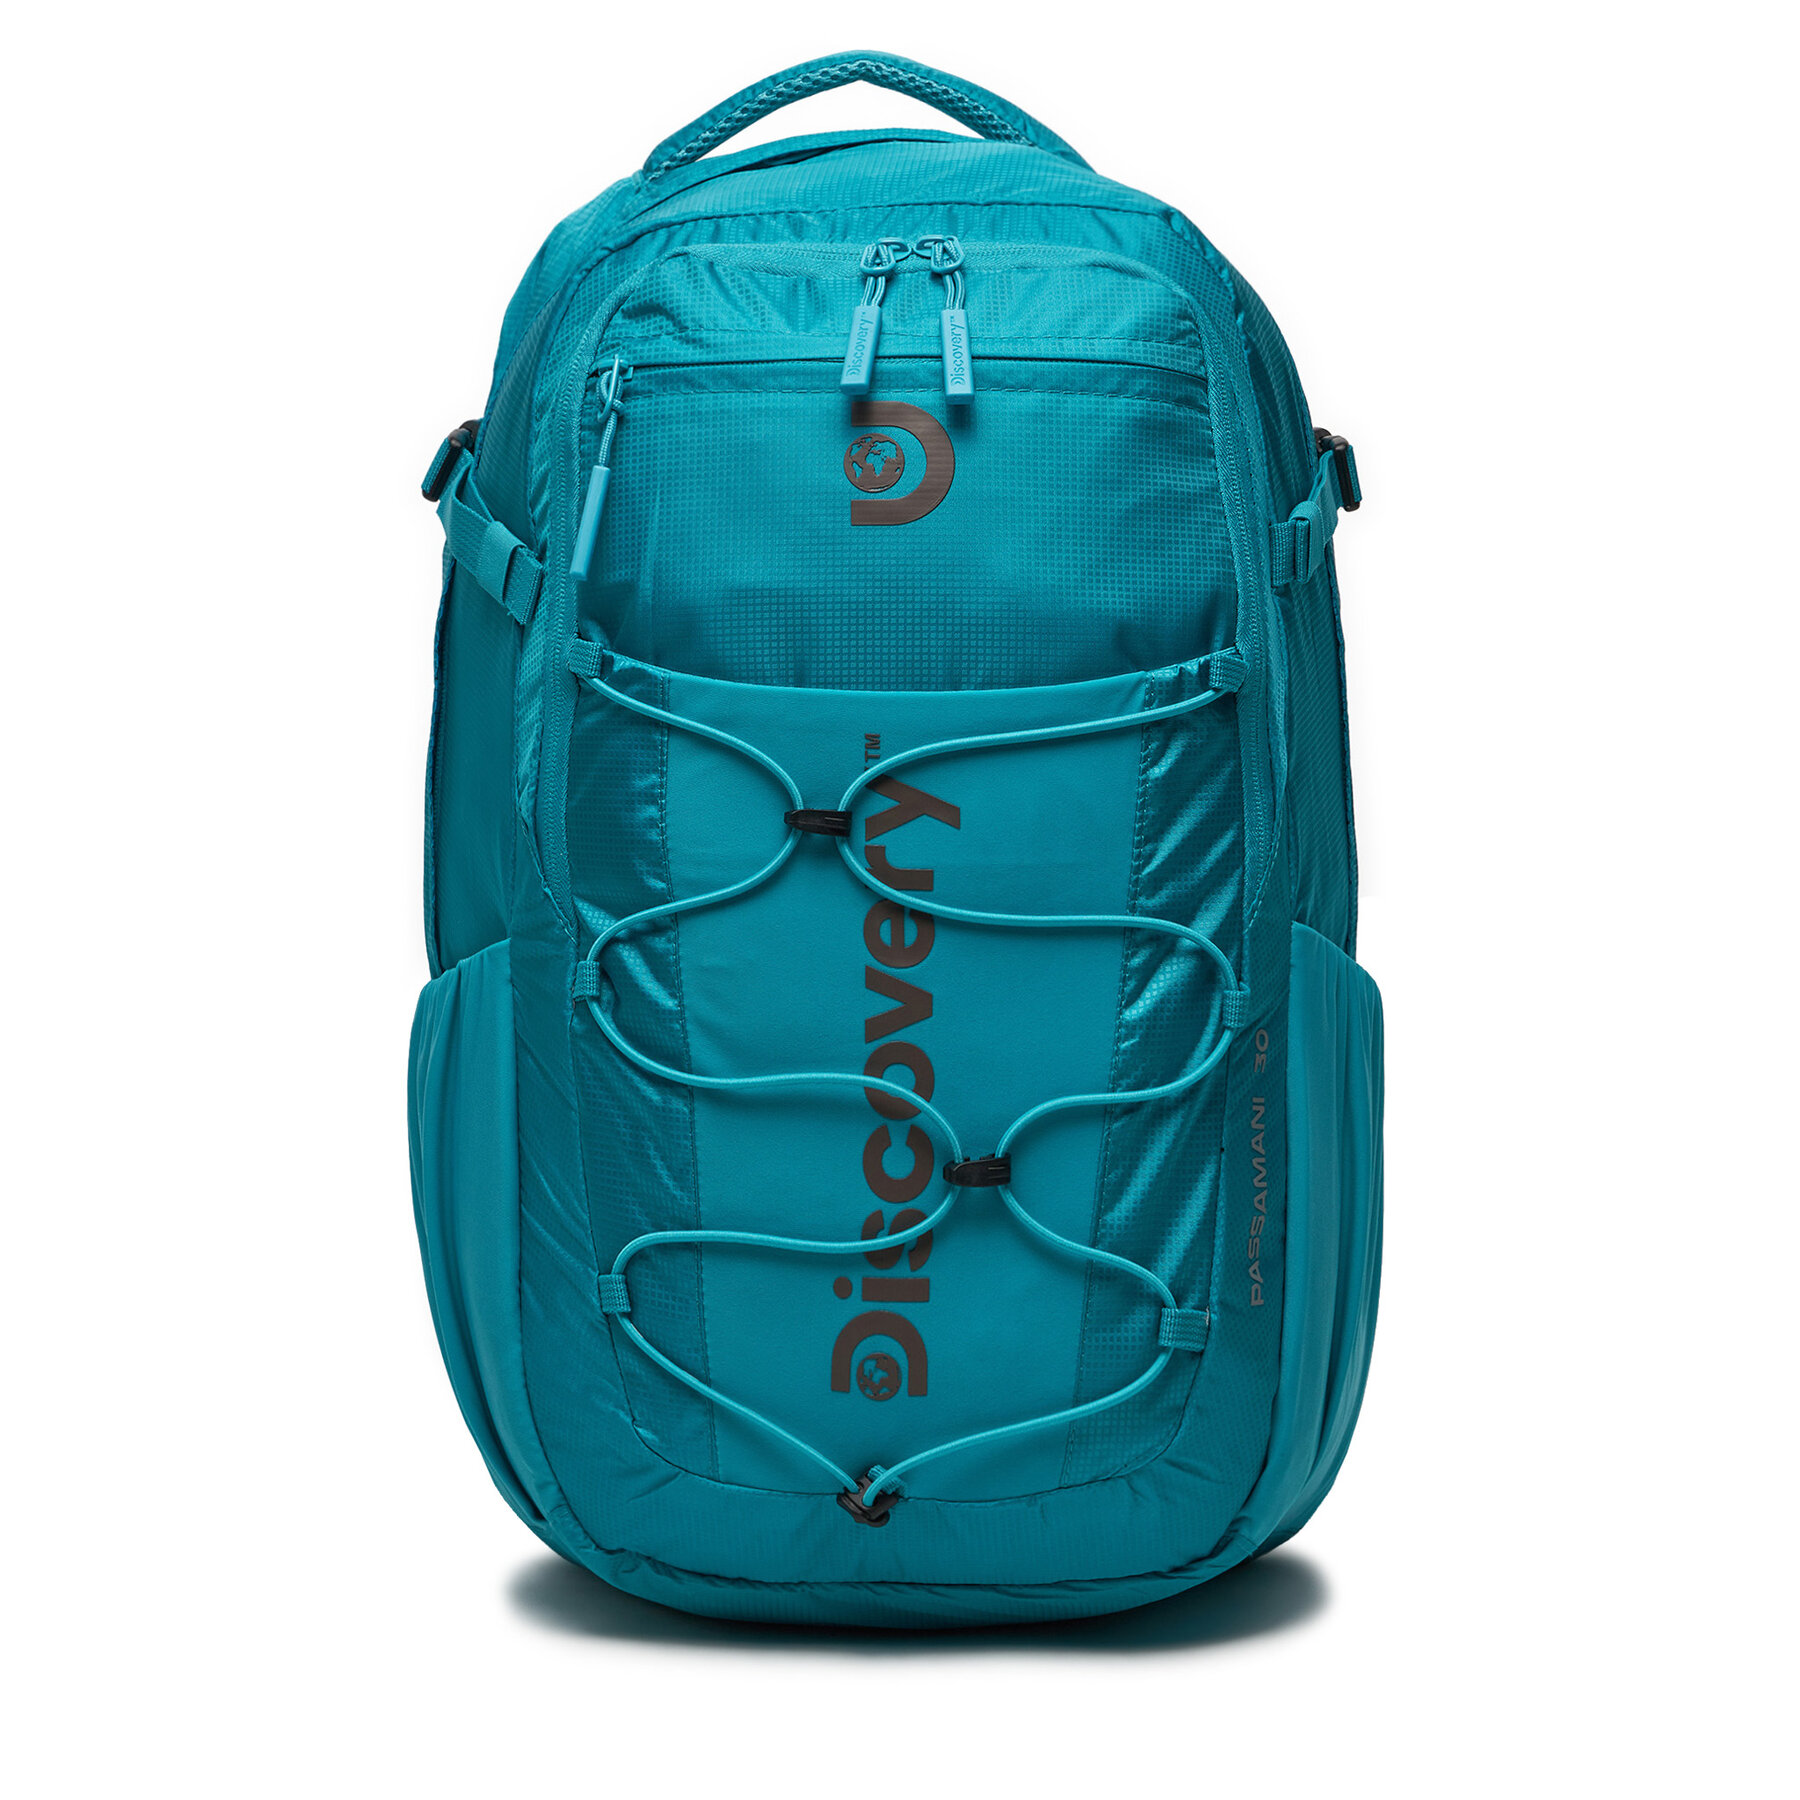 Rucksack Discovery Passamani30 Backpack D00613.39 Türkisfarben von Discovery